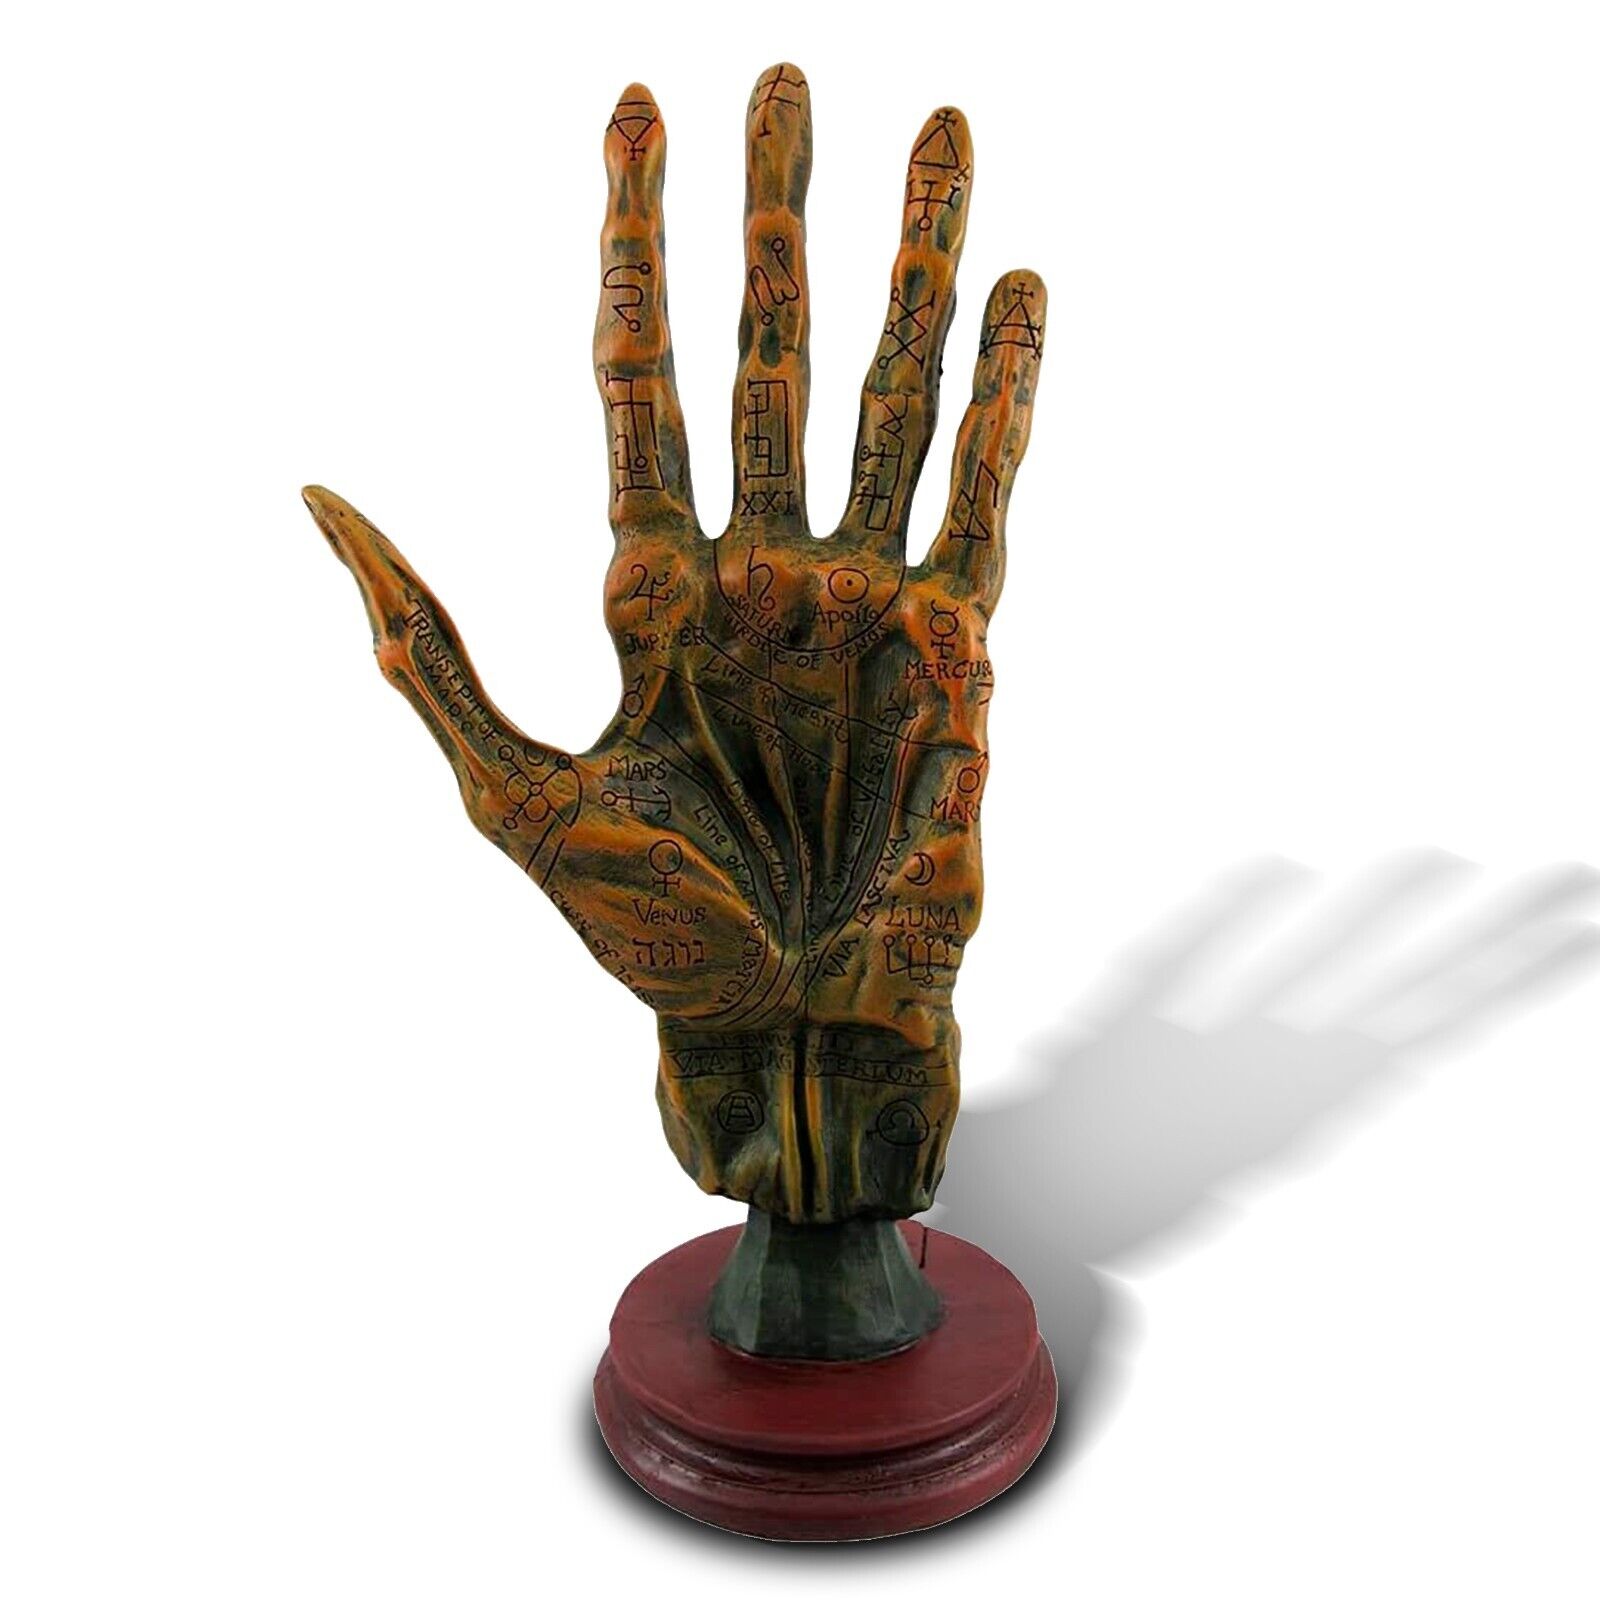 Palm Reading Hand, Hand Decor, Palmistry Hand Sculpture, Witchy Home Decor 11 in